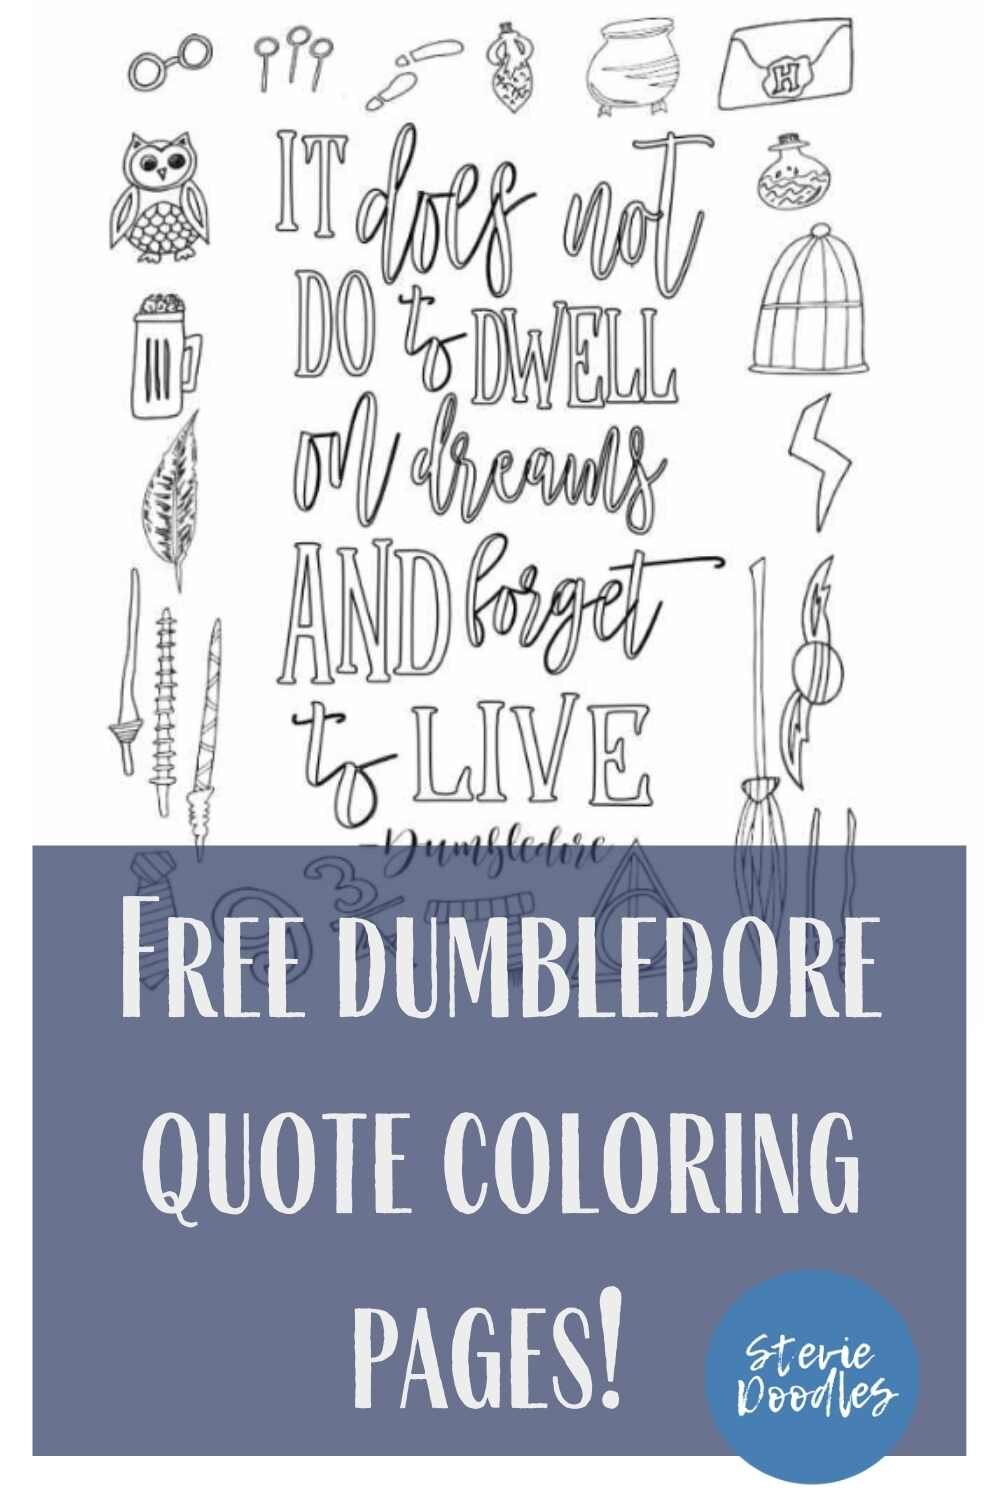 Free printable Dumbledore coloring page “It does not do to dwell on dreams . . .”